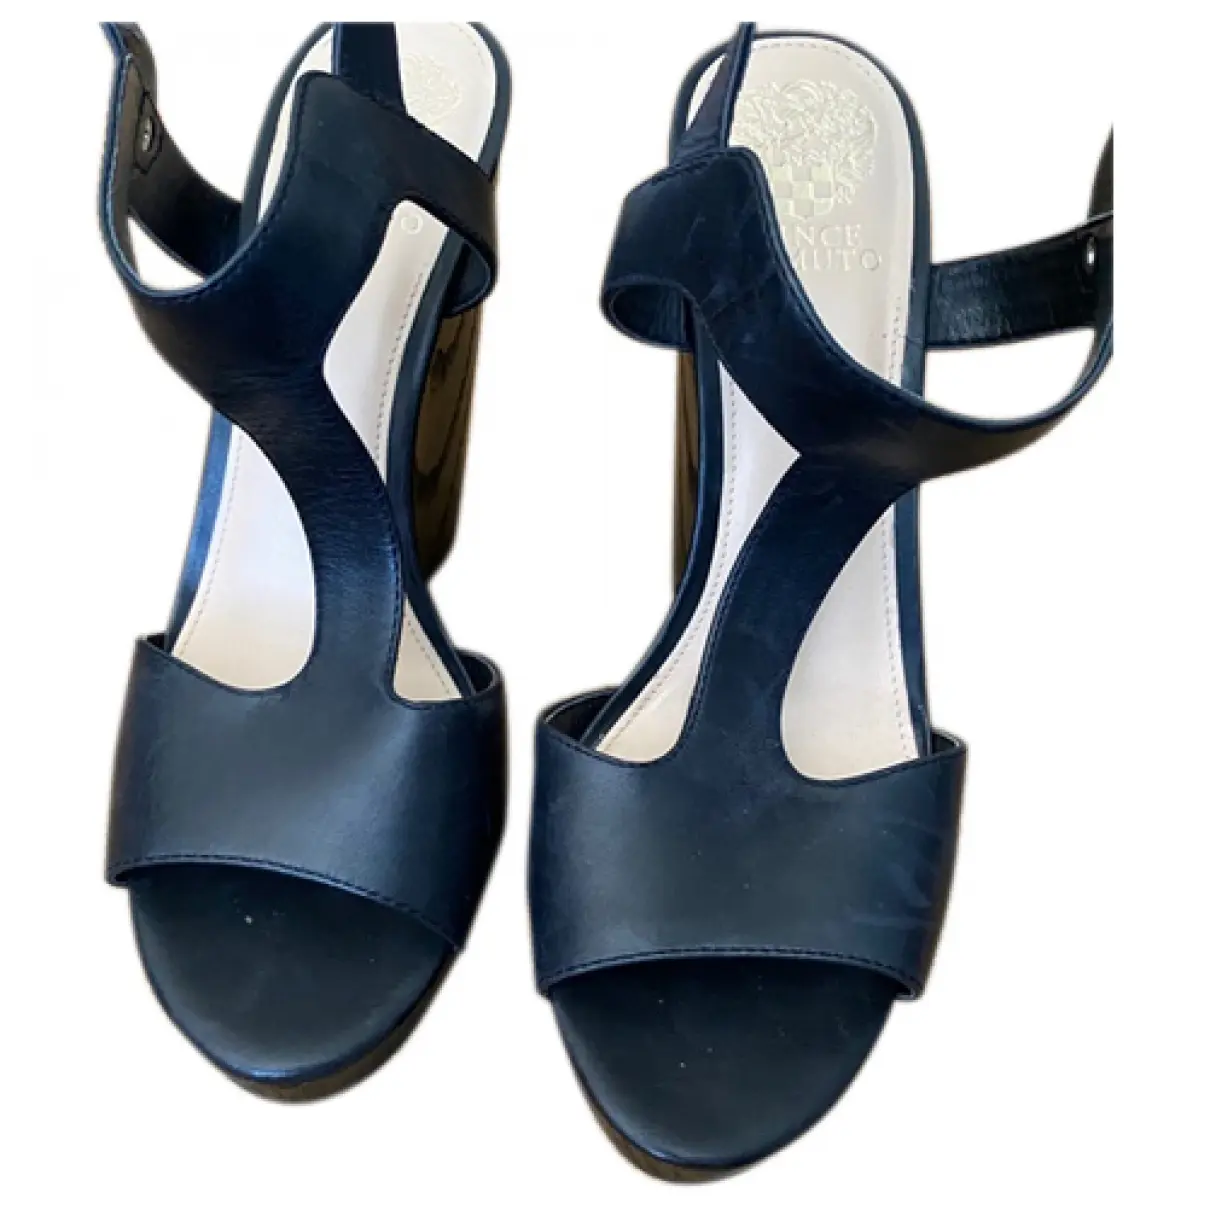 Leather sandals Vince  Camuto